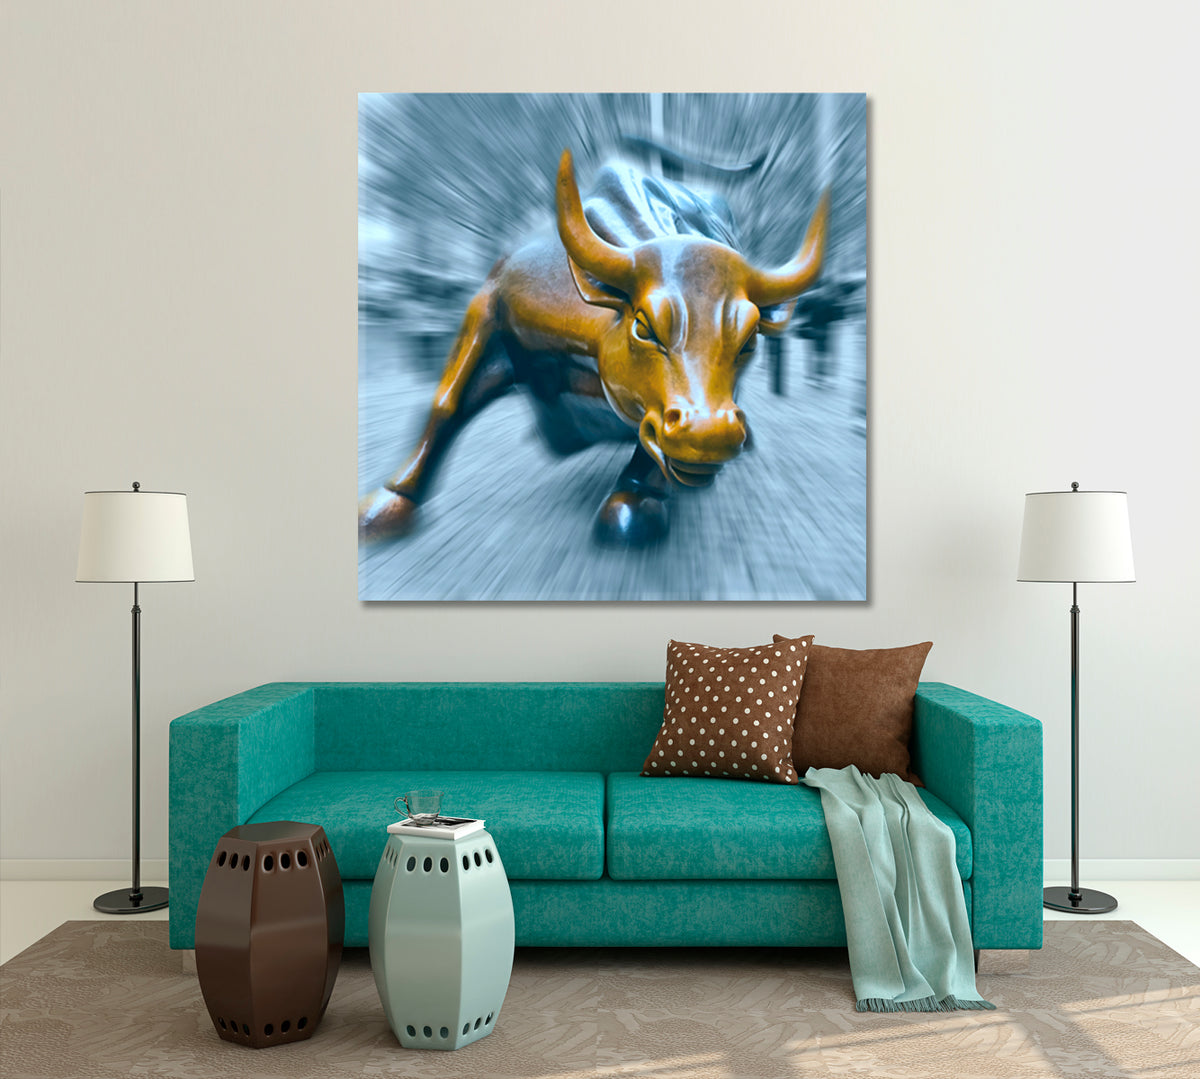 Charging Bull Blue- Square Panel Business Concept Wall Art Artesty 1 Panel 12"x12" 